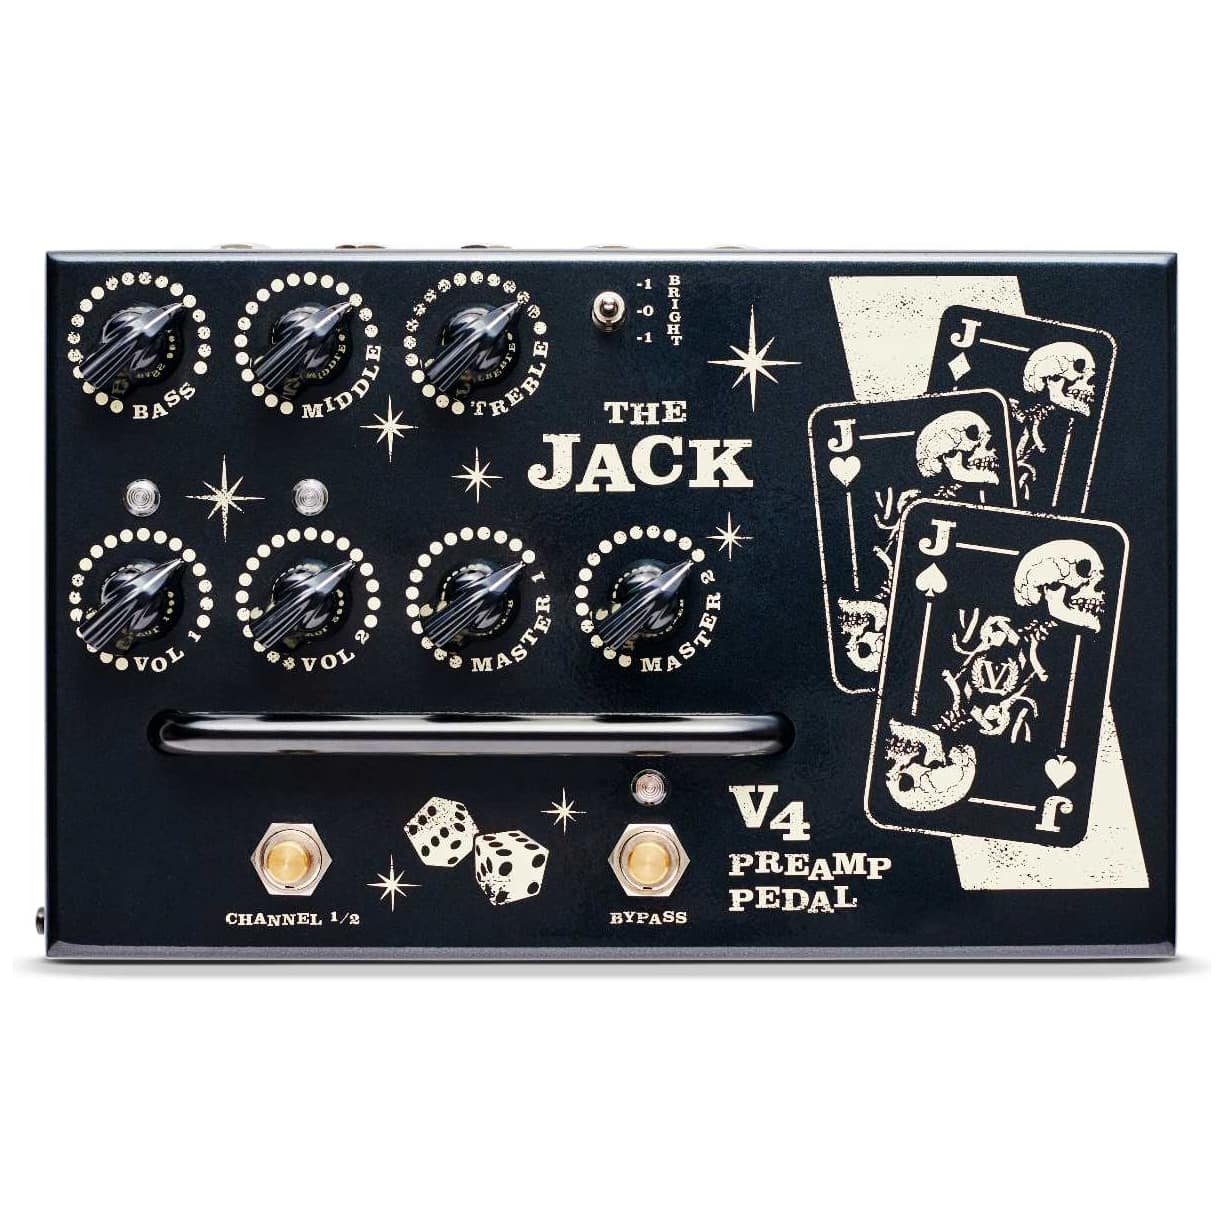 Victory Amps V4 The Jack Pedal Preamp B-Ware